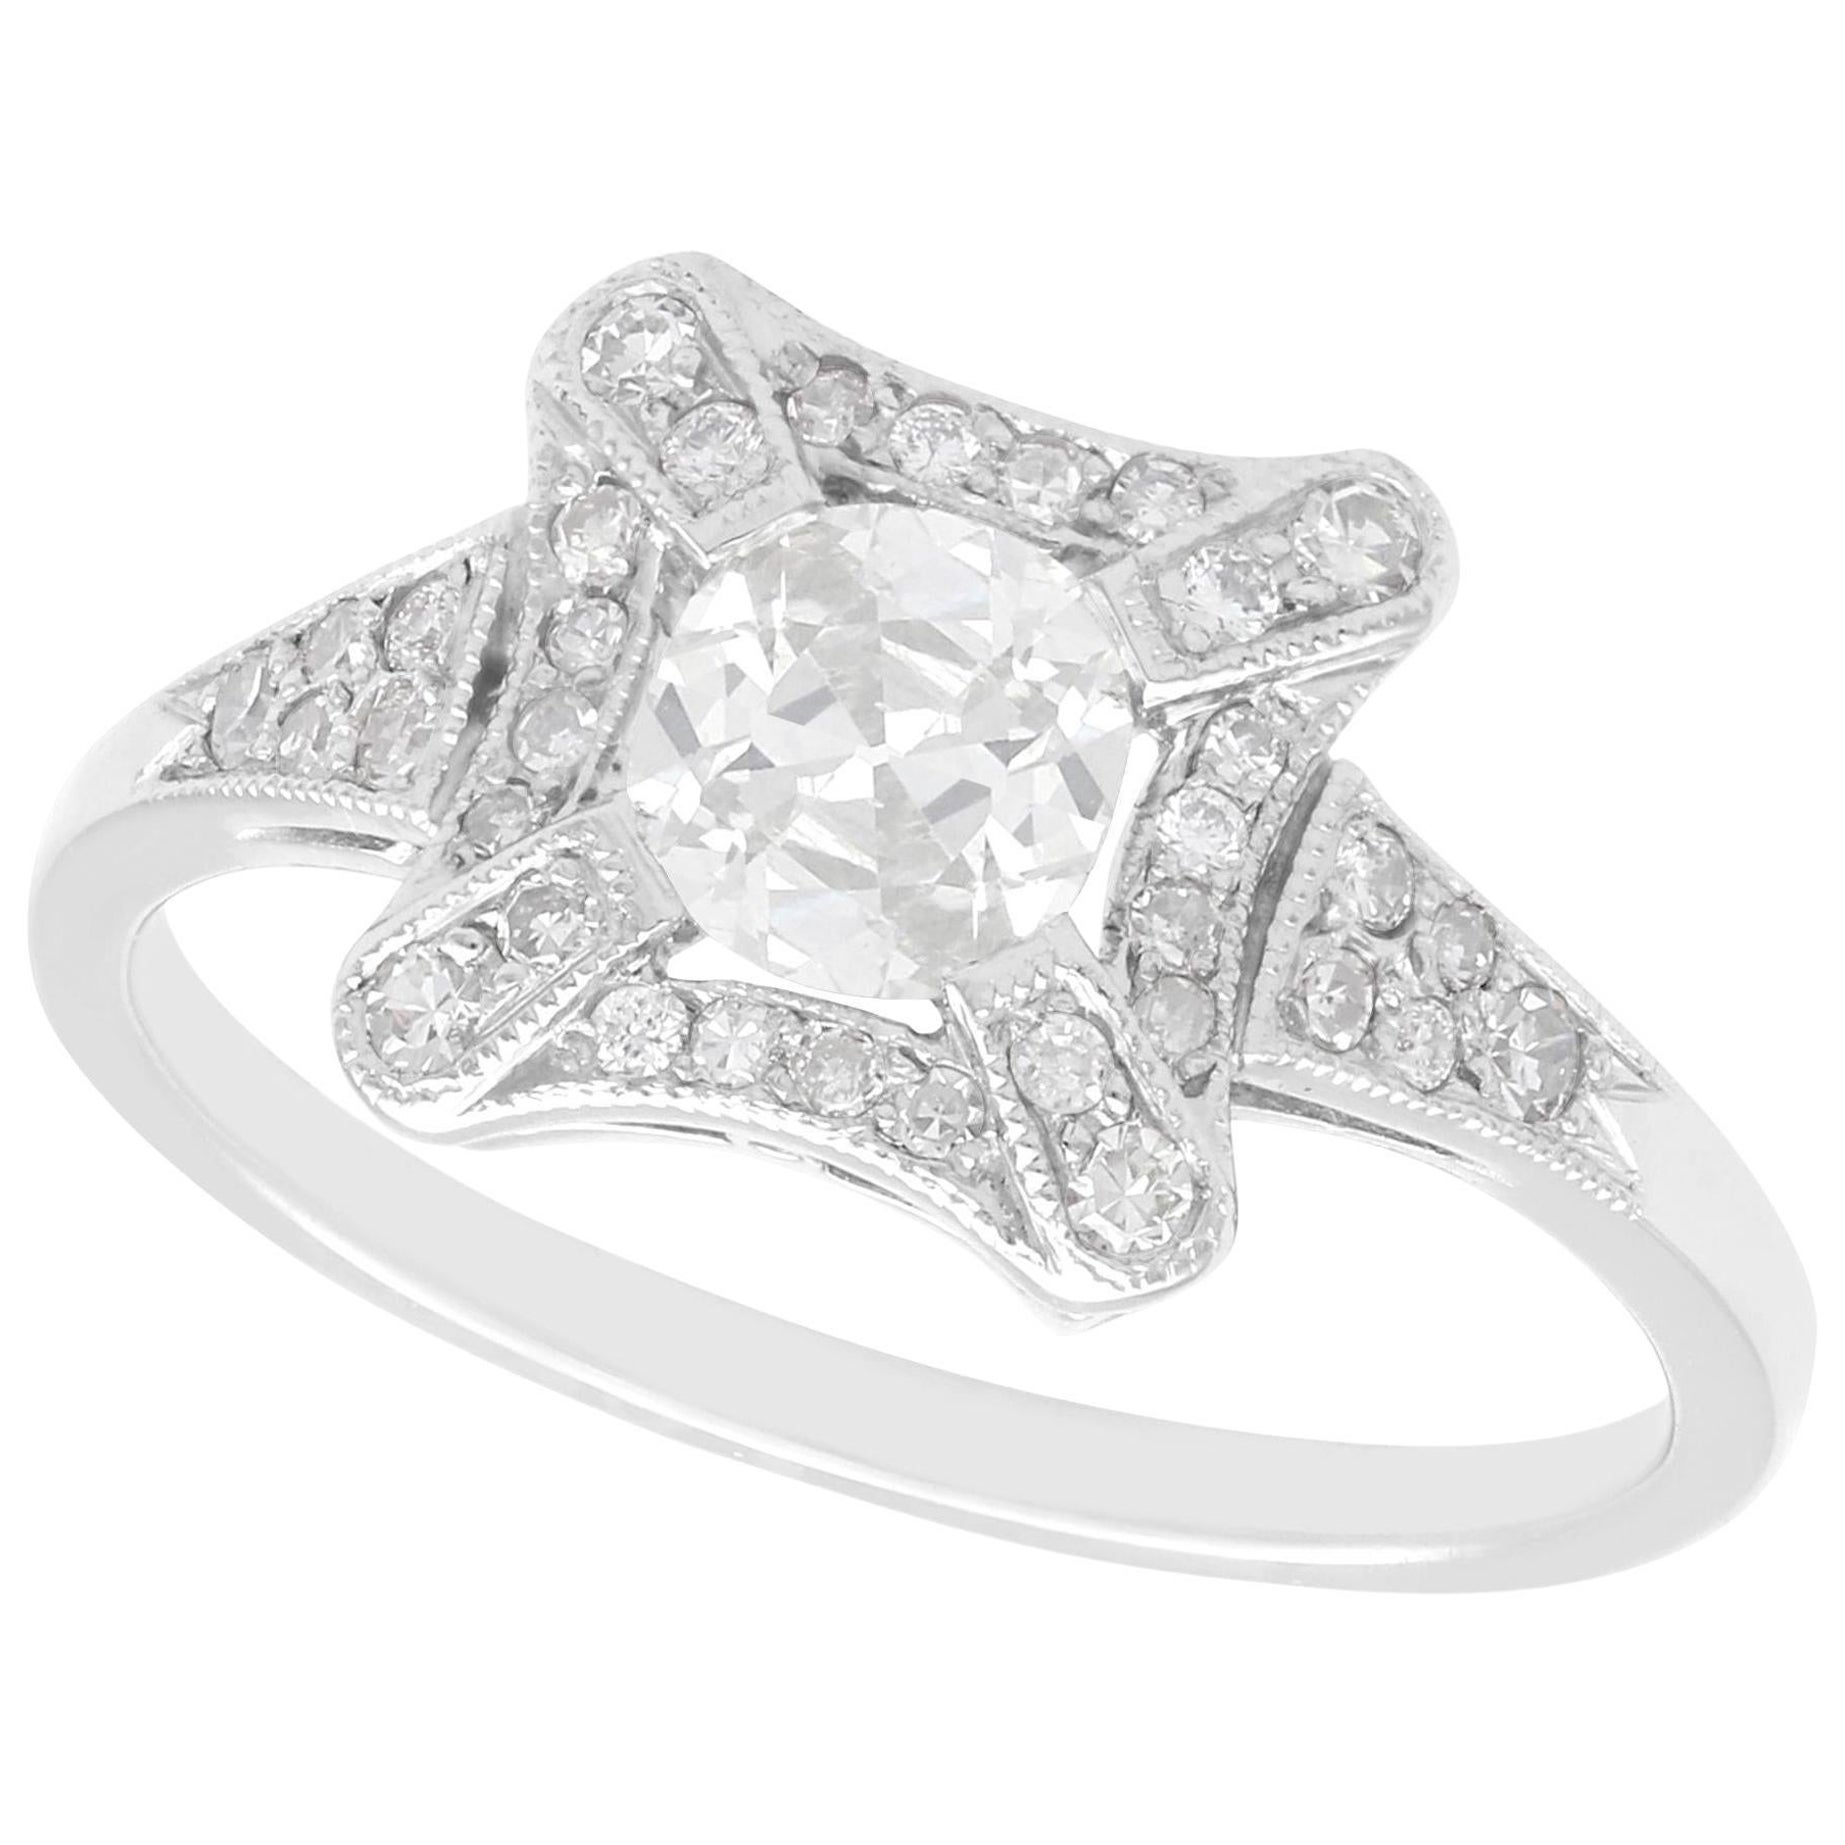 1.06 Carat Diamond and Platinum Cluster Engagement Ring For Sale